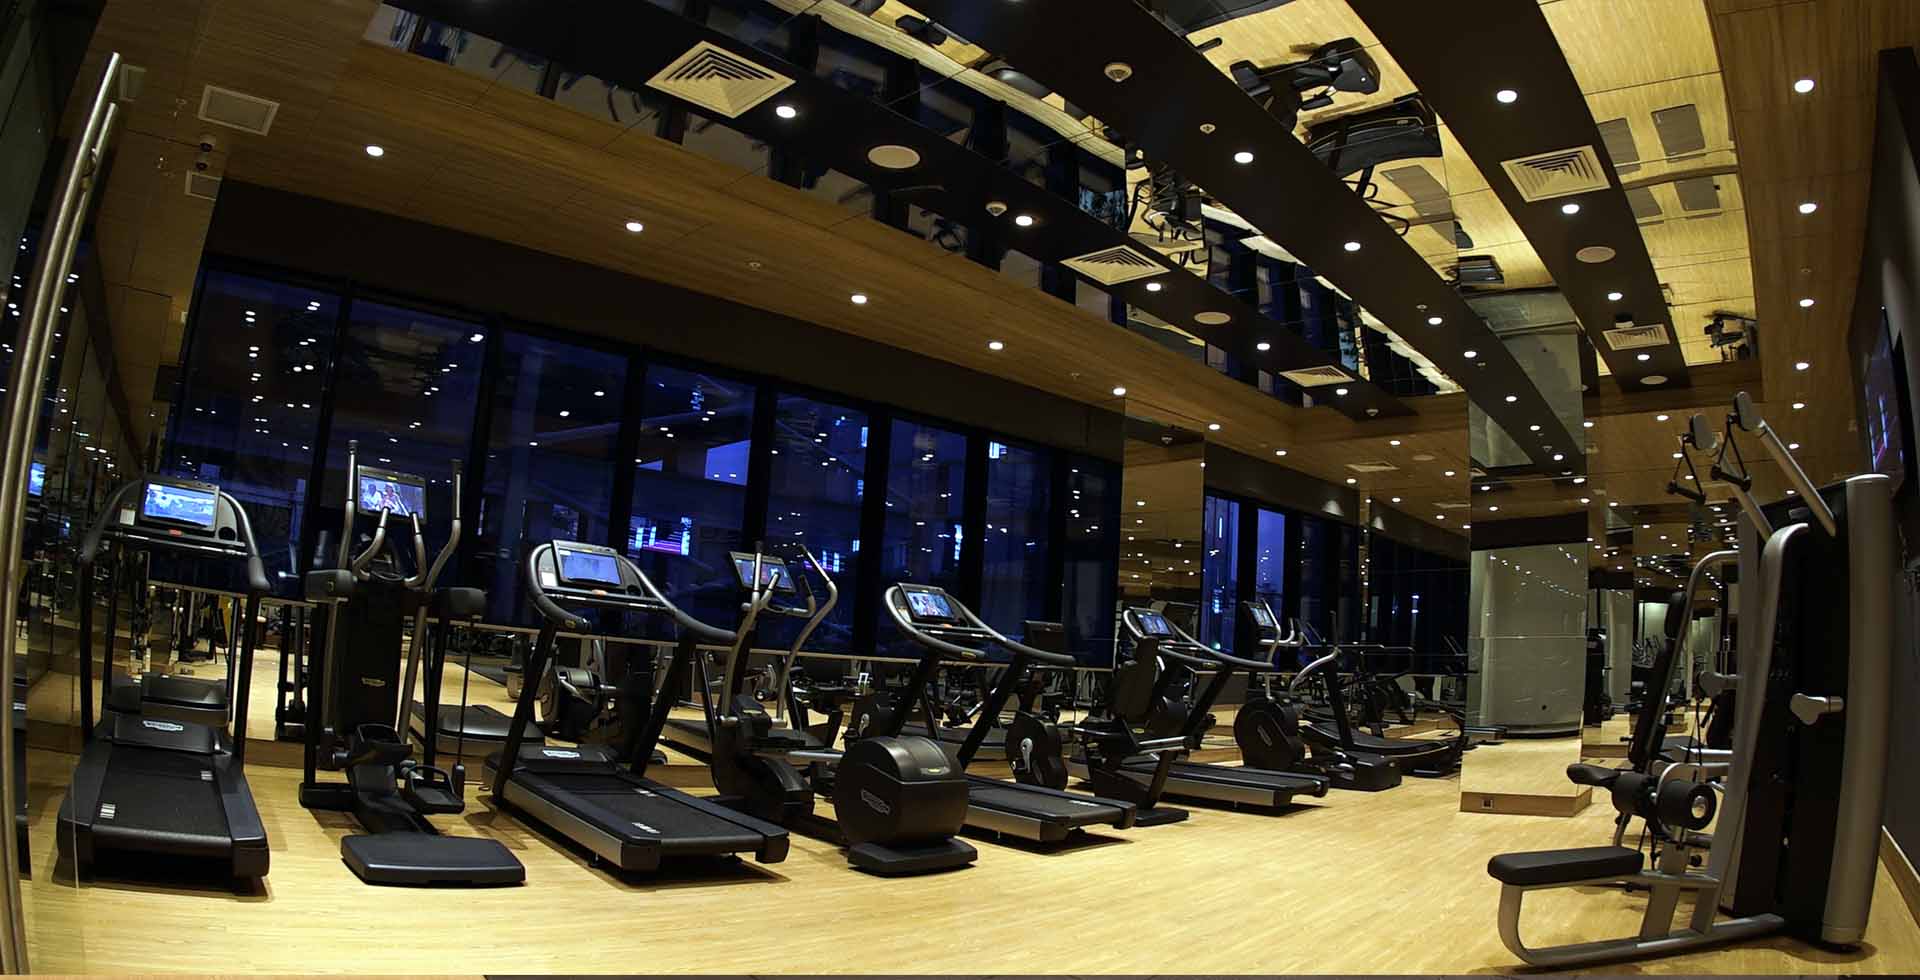 Sauna Dekor's contemporary fitness center in Eindhoven, equipped with modern exercise facilities, combines fitness excellence with sleek design for an elevated workout environment.